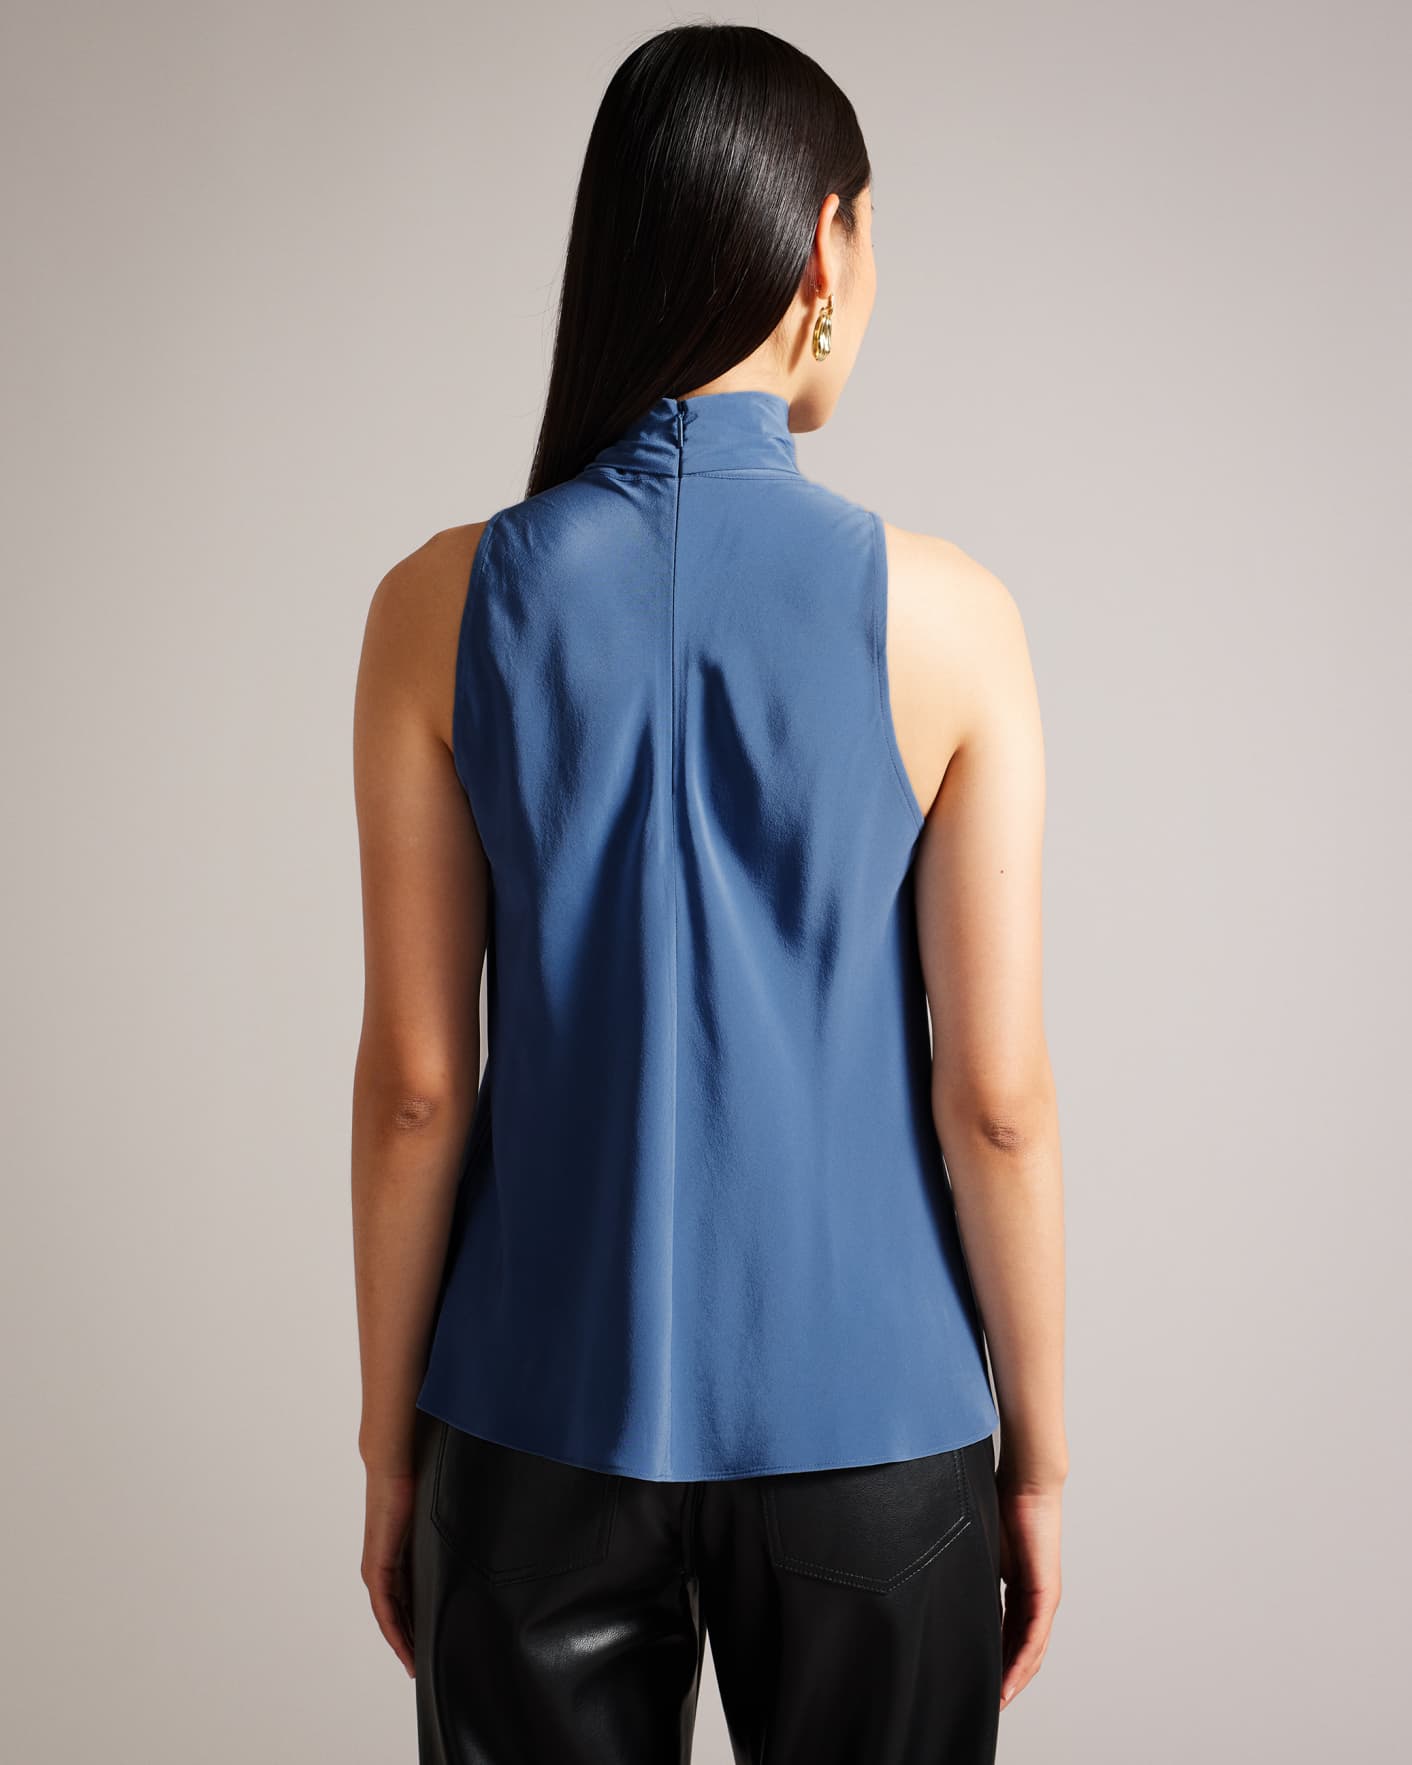 IMMIIE - BLUE | Blouses & Shirts | Ted Baker UK